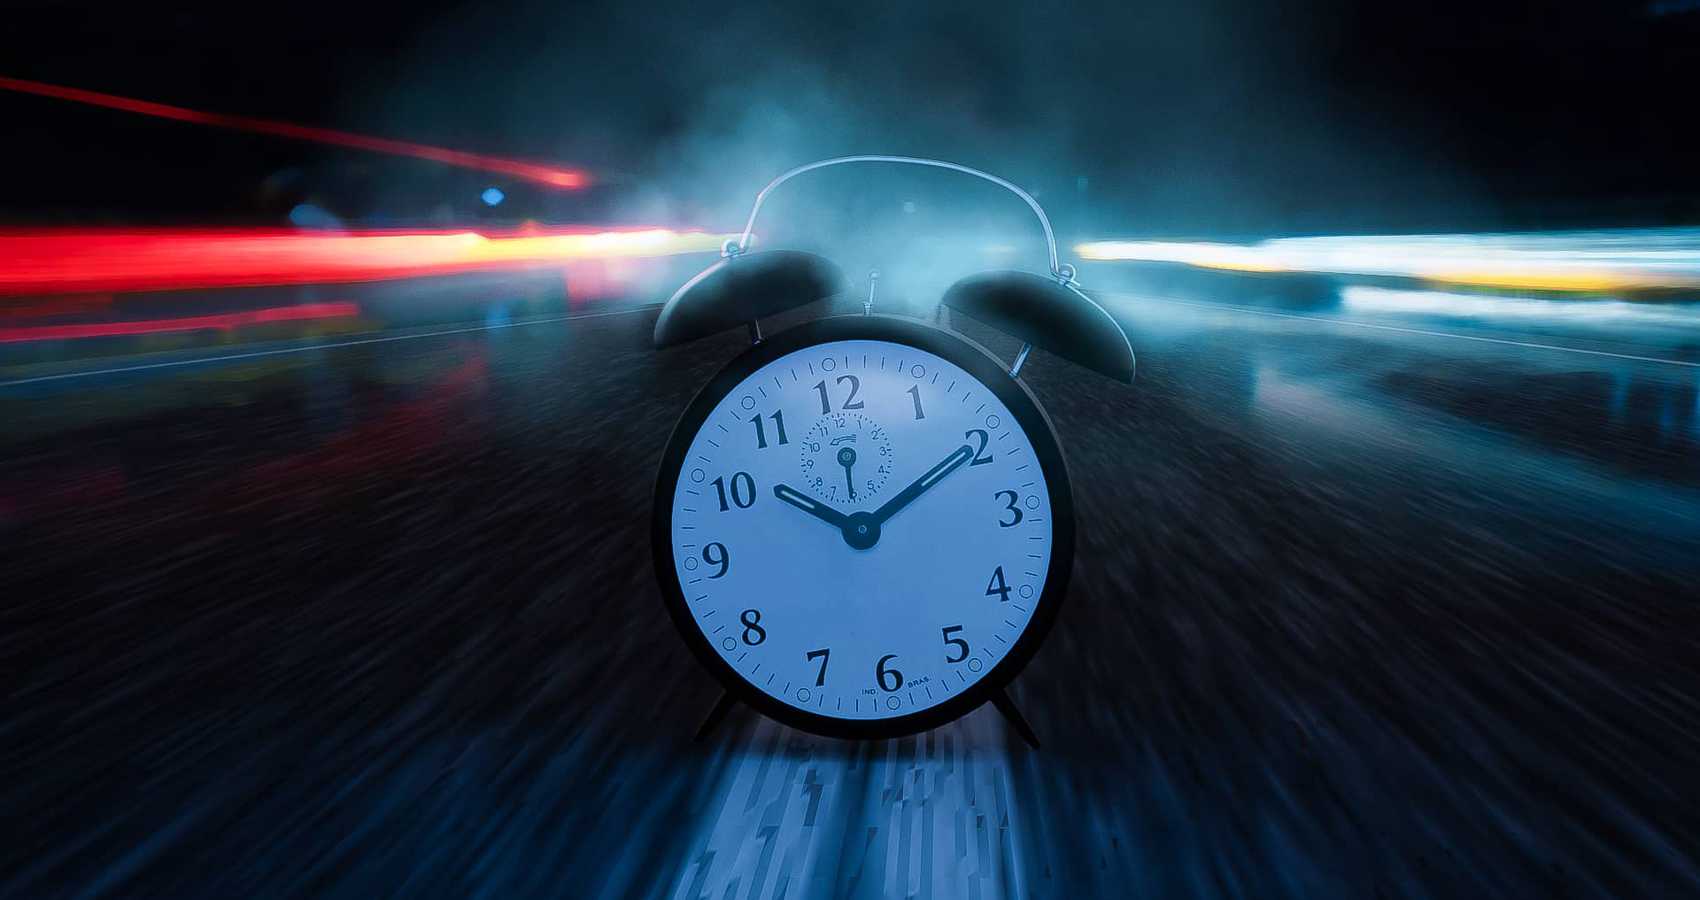 The Cusp of Time, poem by RC Larlham at Spillwords.com